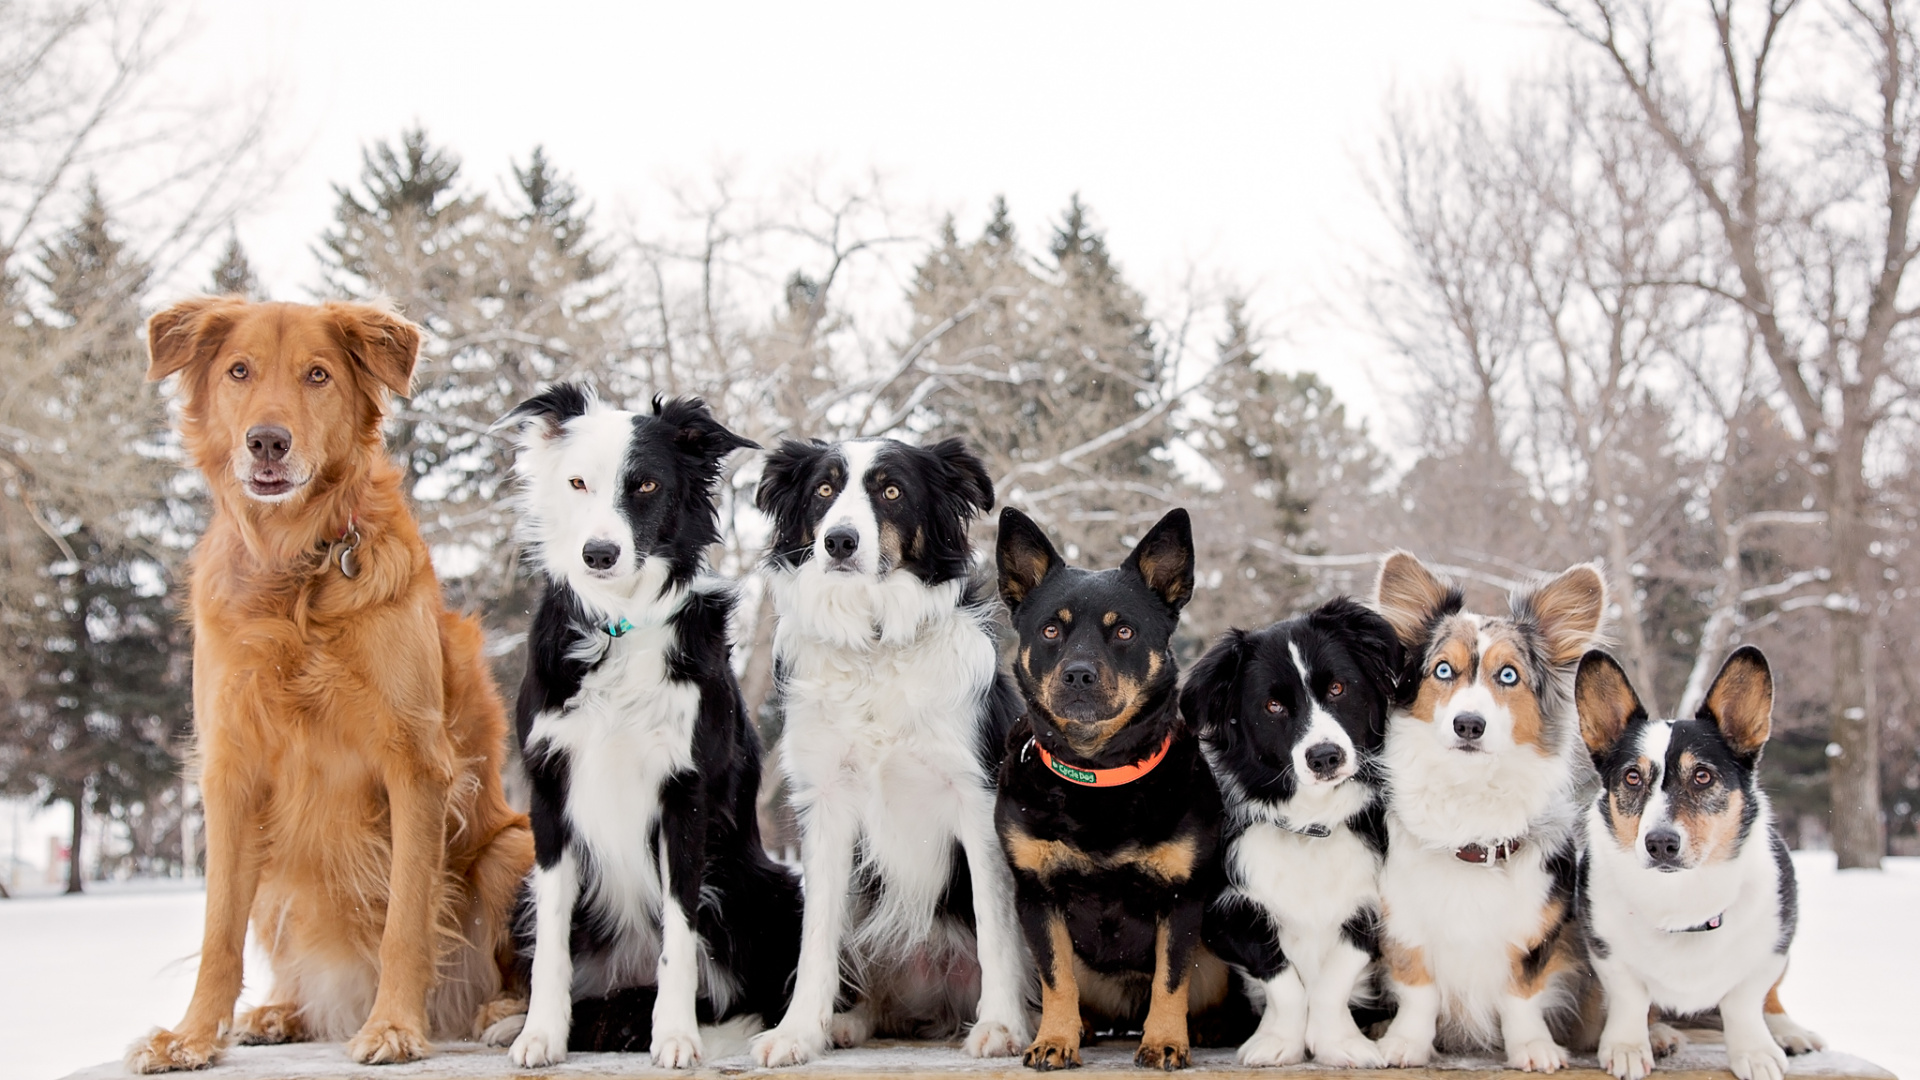 Black and White Border Collie and Brown and White Short Coat Medium Dog on Snow Covered. Wallpaper in 1920x1080 Resolution